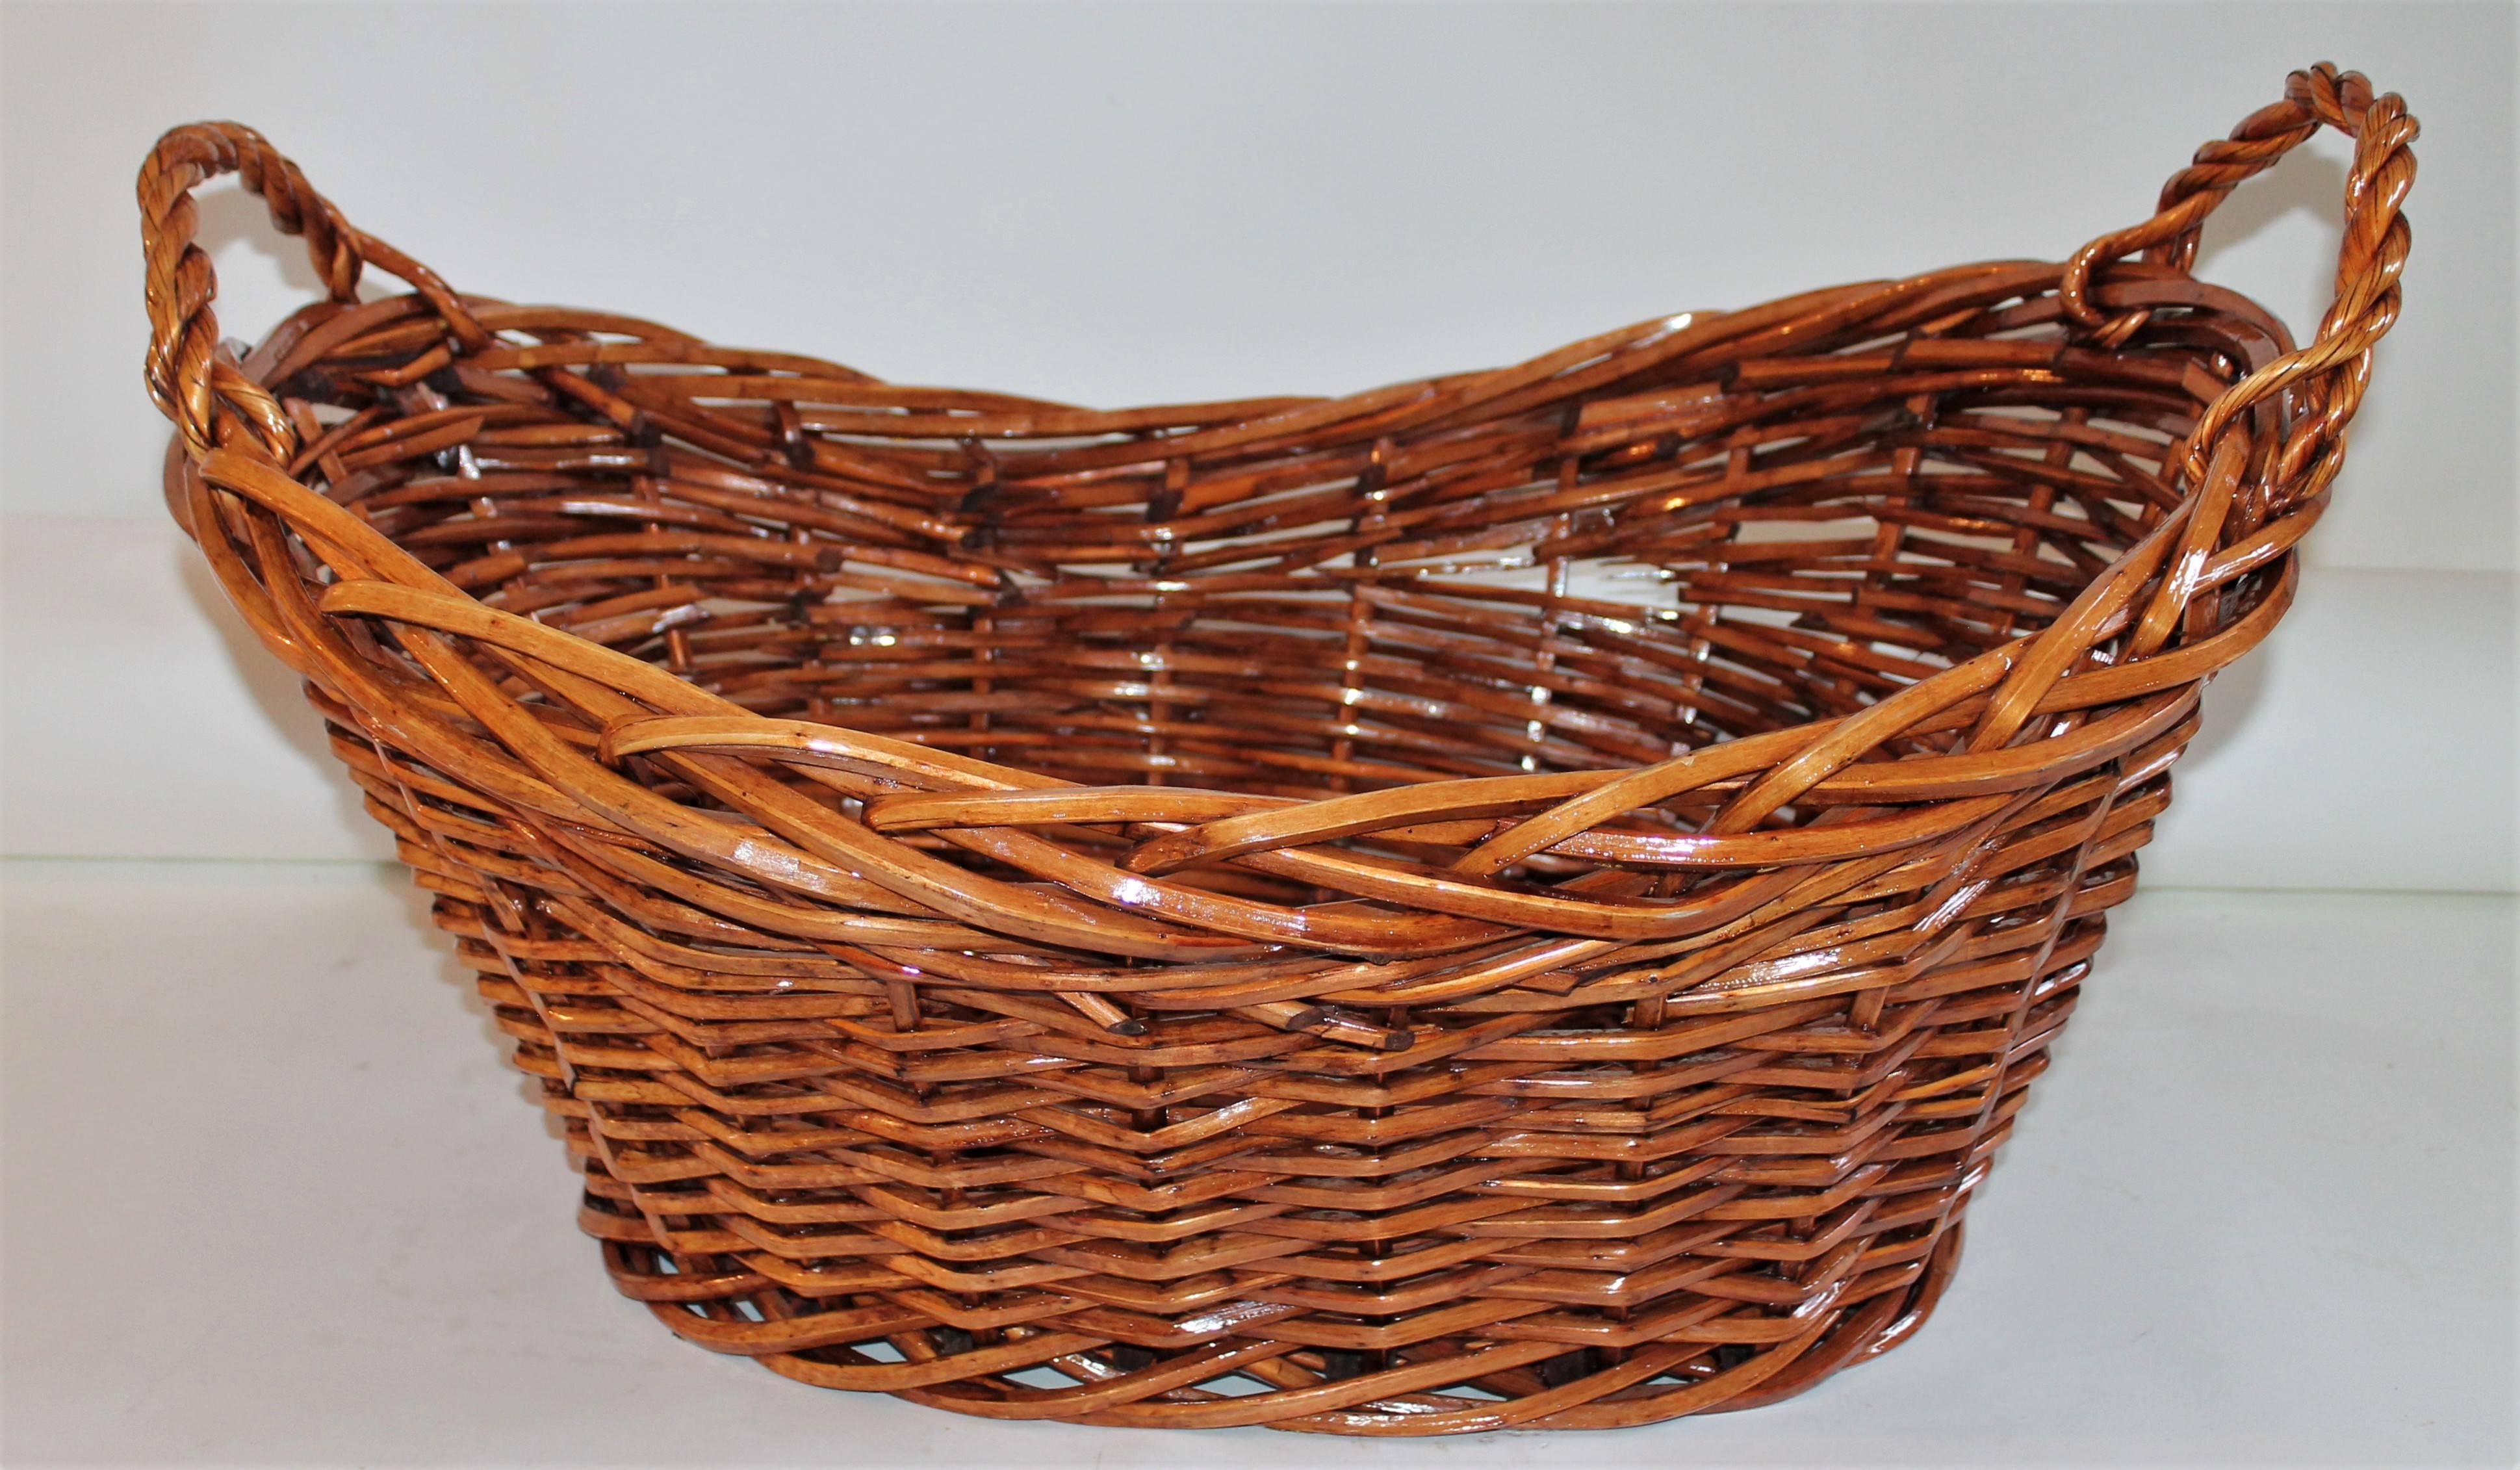 This willow laundry basket is in good condition and quite unusual shape. It has a stained varnish finish. This hand woven basket has a western or cabin look to it.